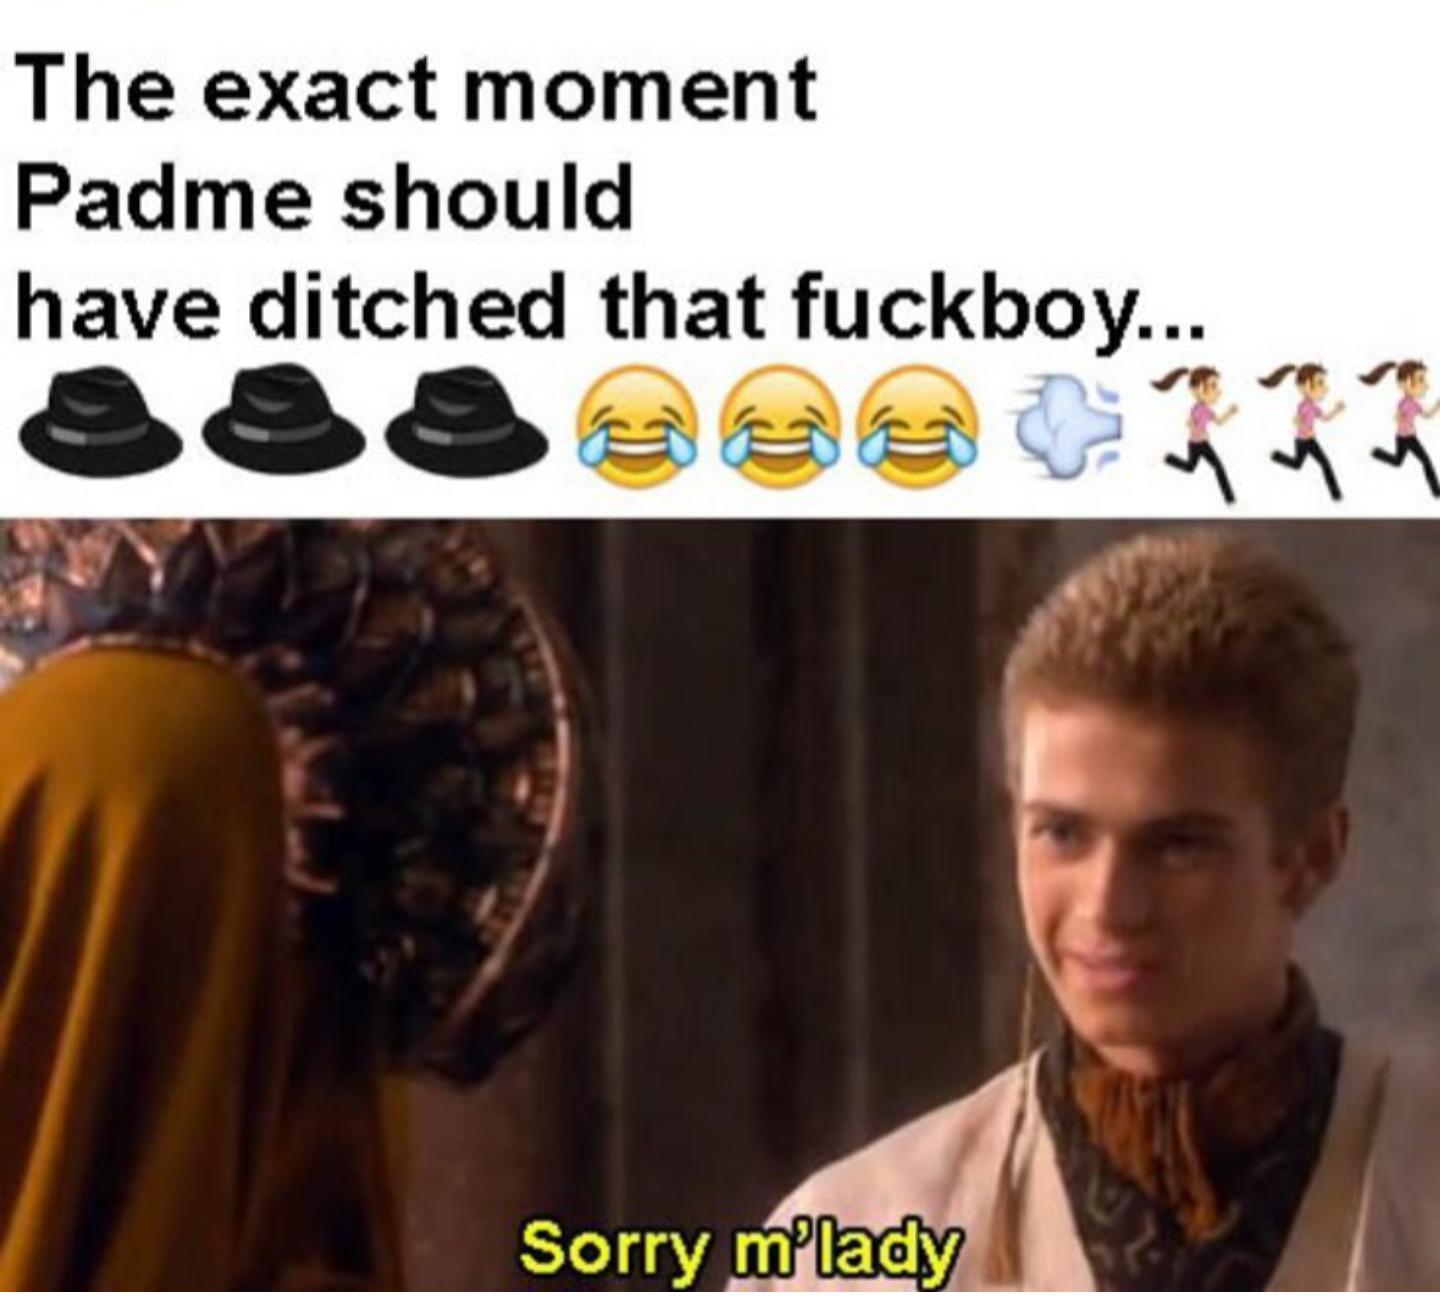 hairstyle - The exact moment Padme should have ditched that fuckboy... Sorry m'lady